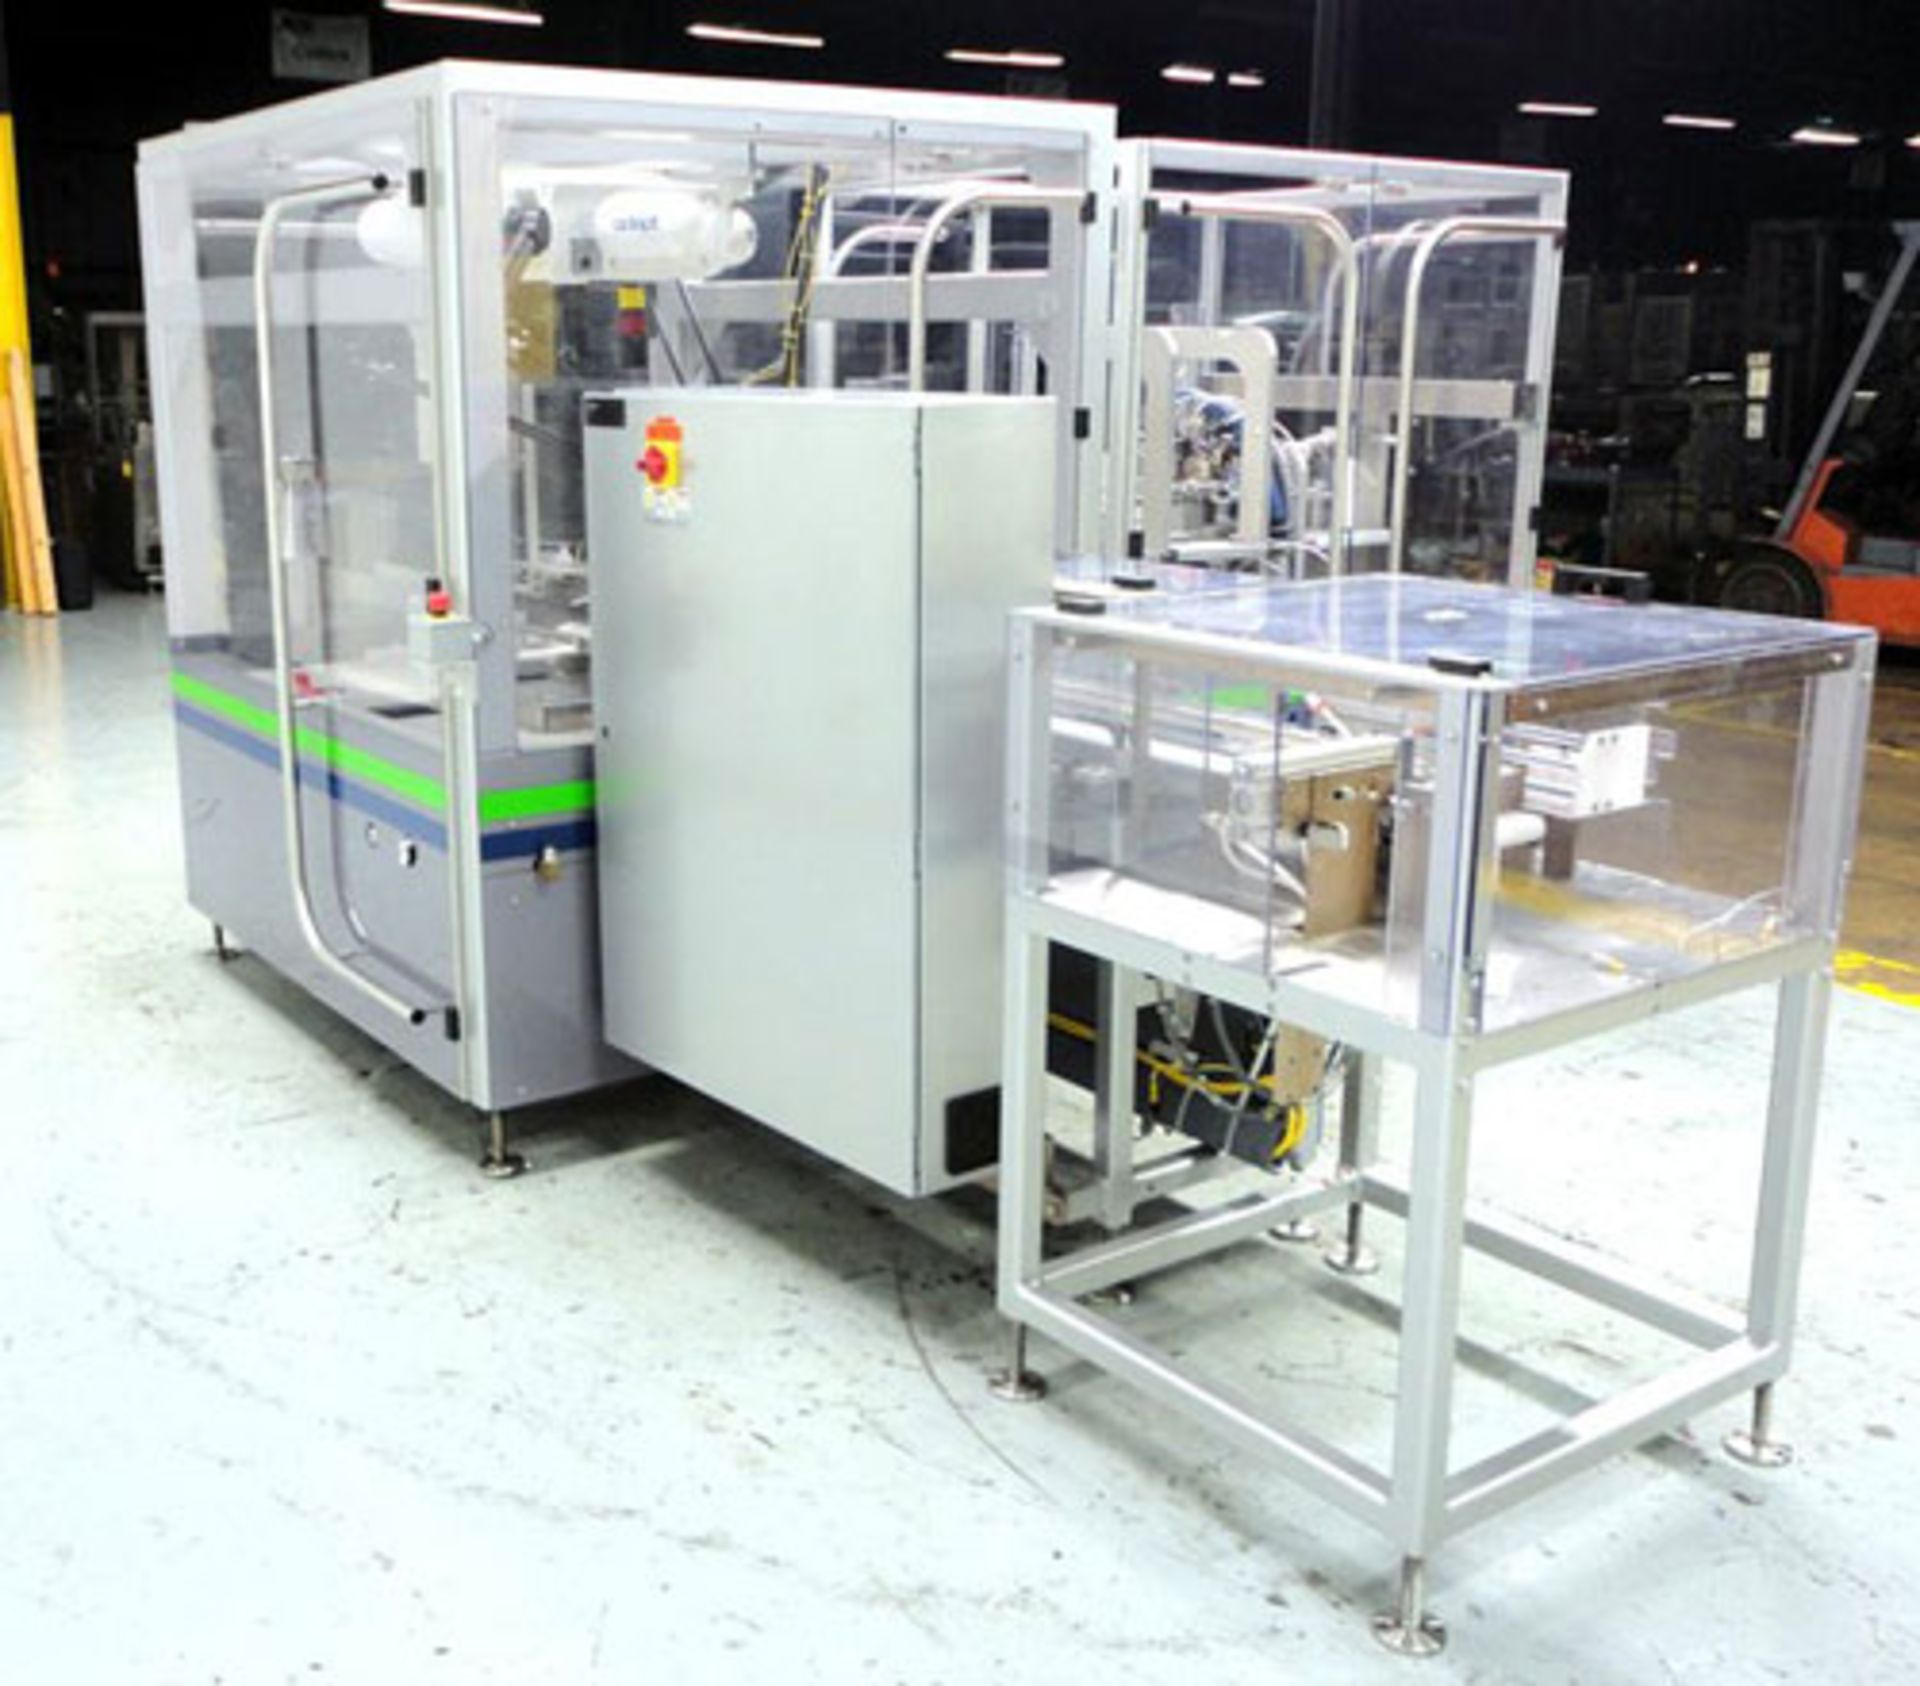 MGS Top Load Carton Former with Robotic Pick and Place Unit - Image 3 of 24